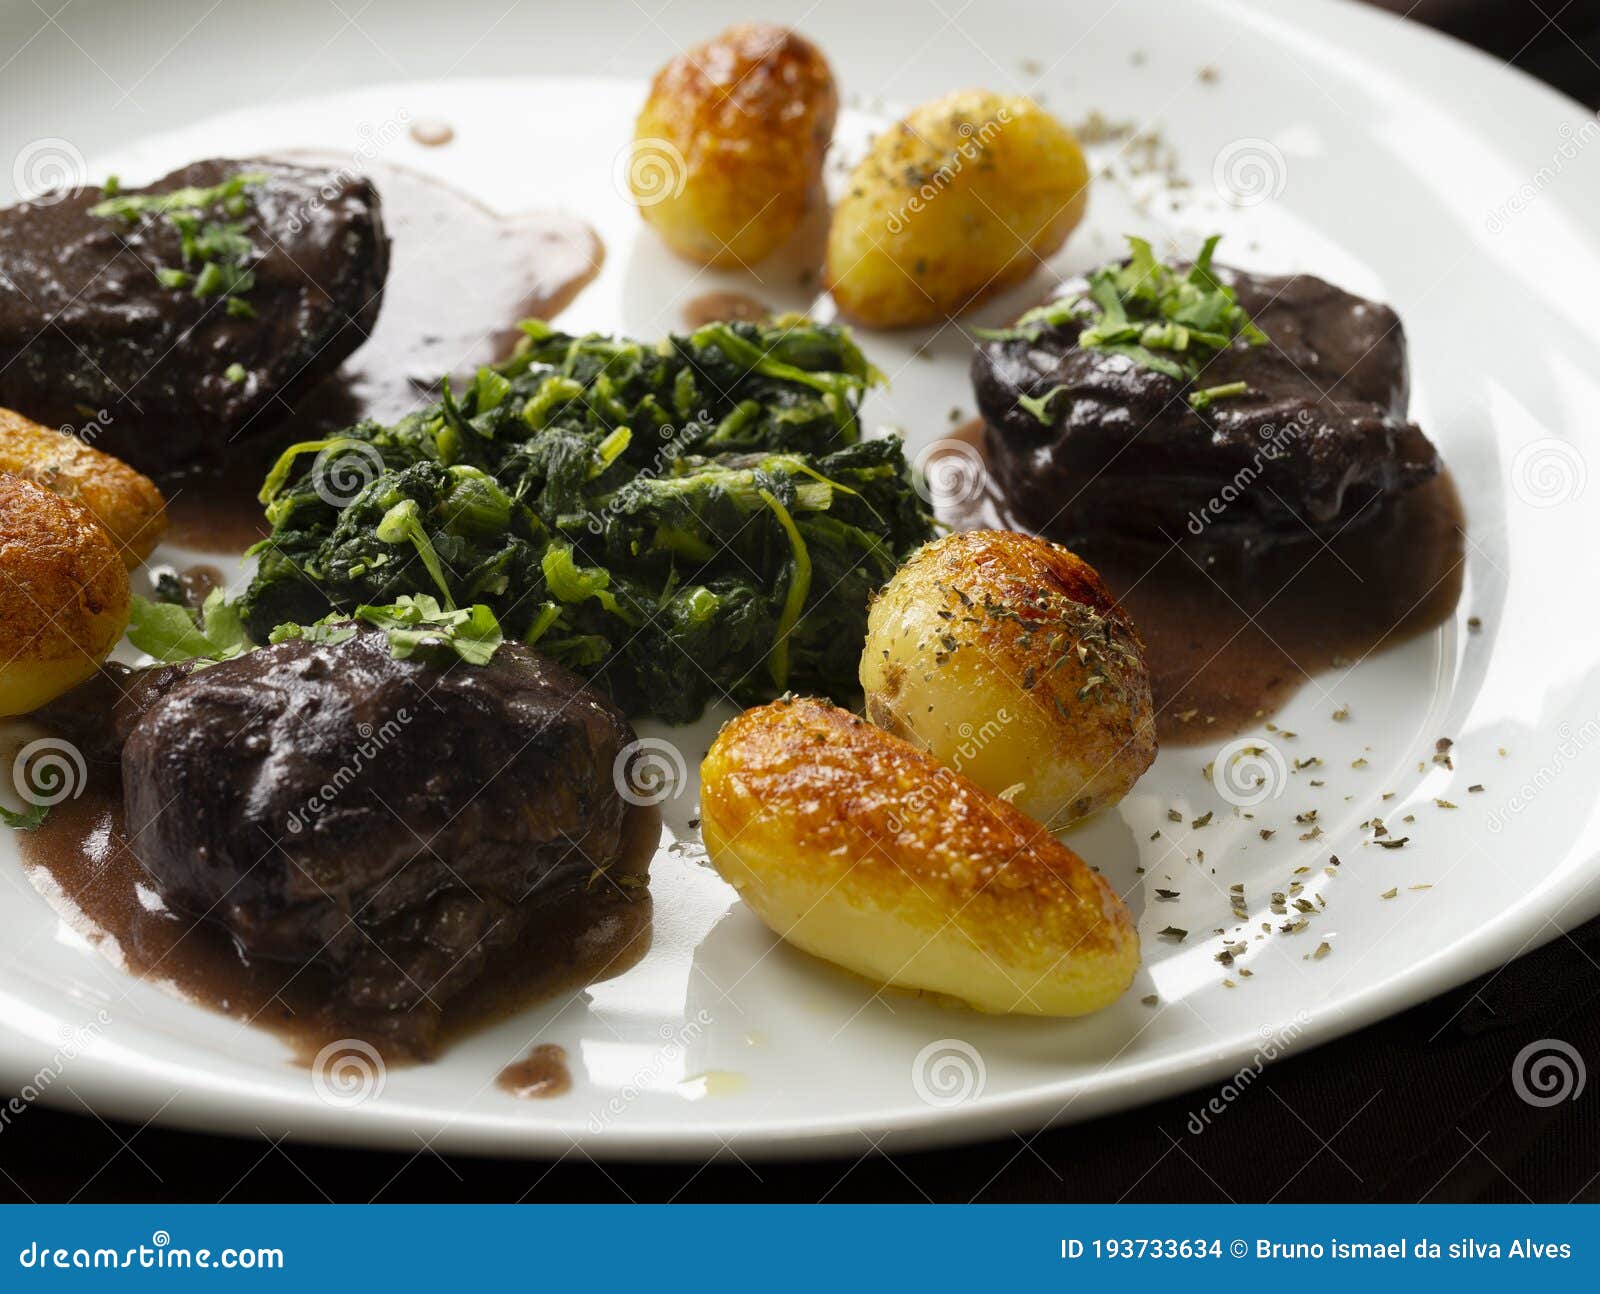 the `mimos de porco preto` is a typical plate from mediterranean food made with black pig meat.